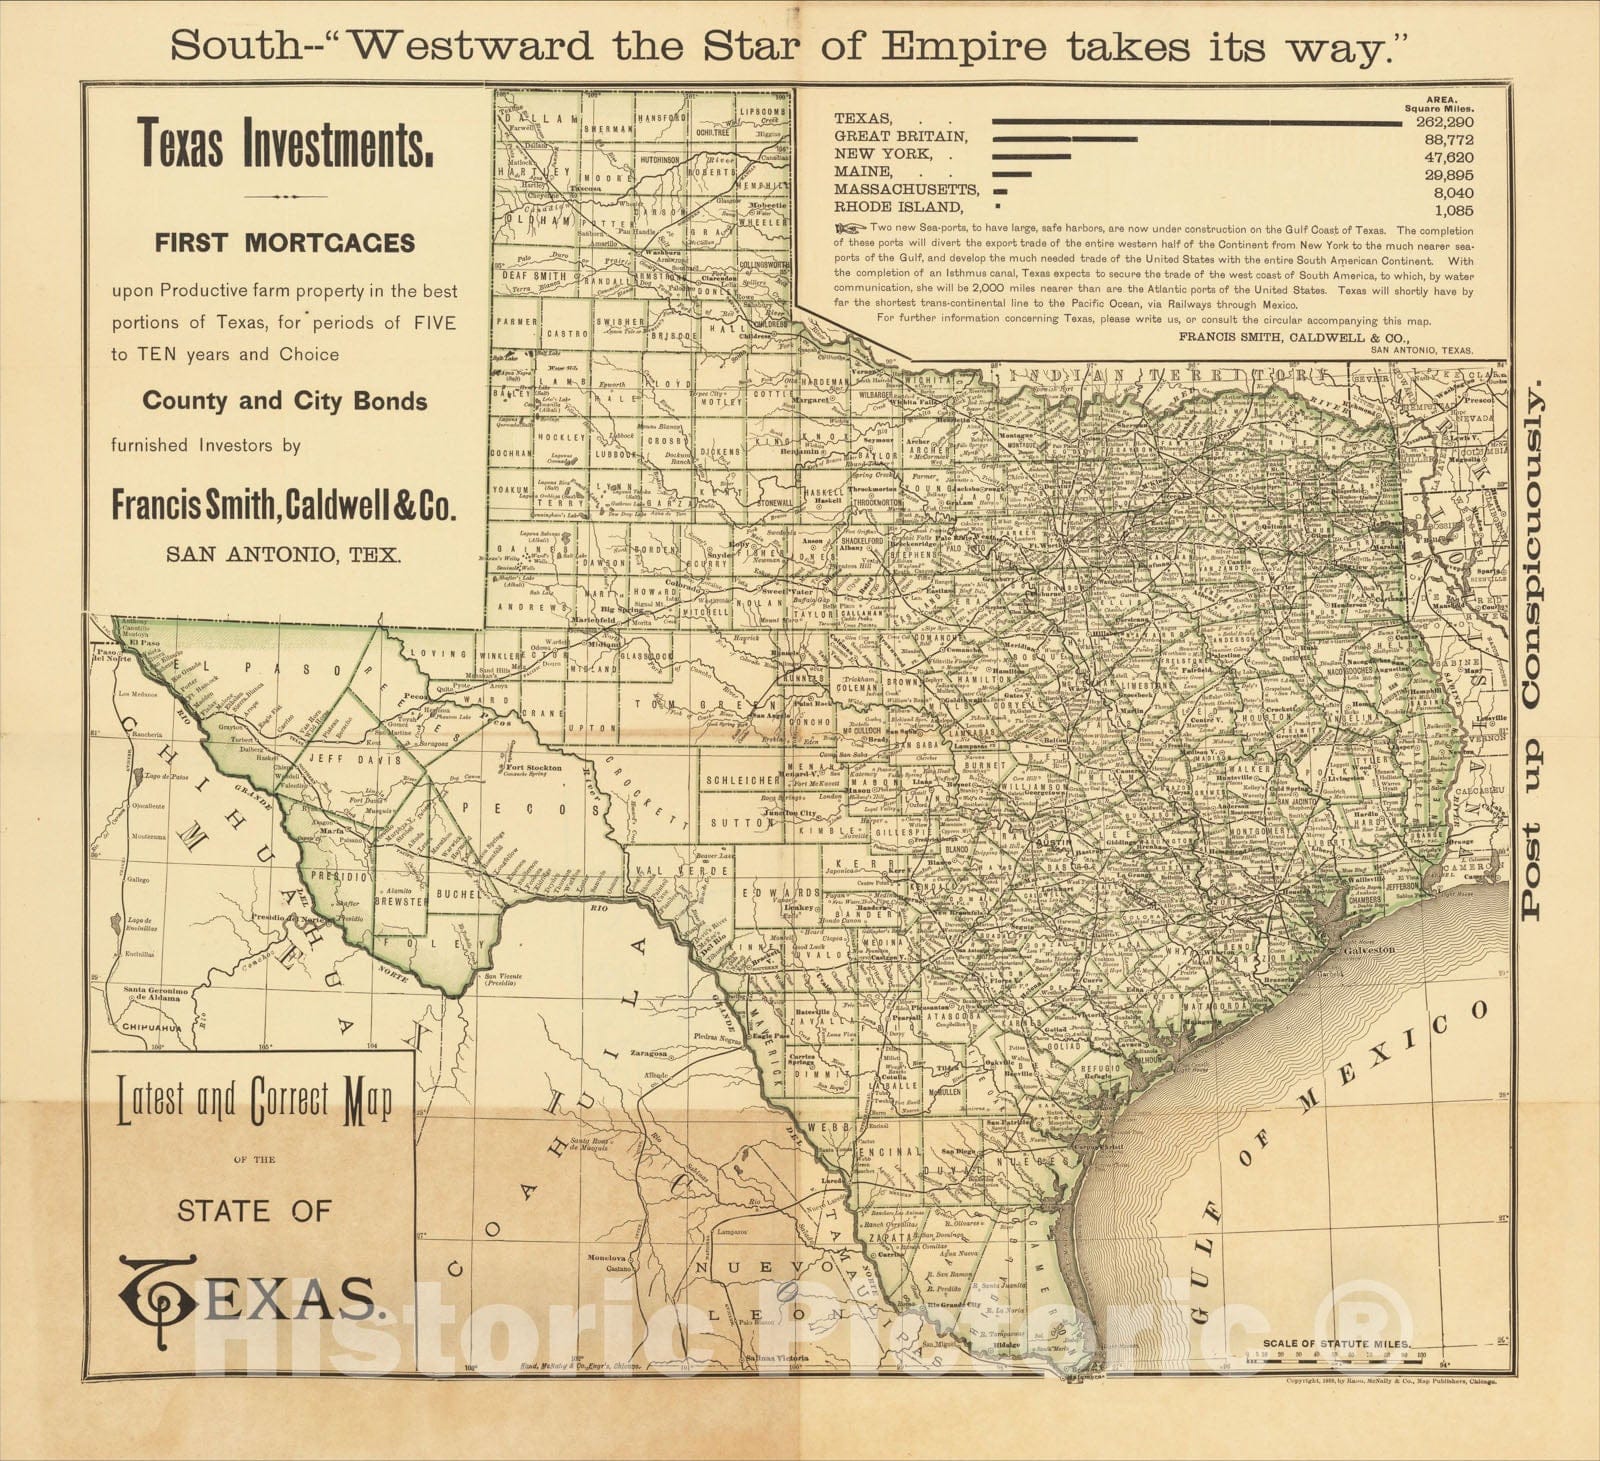 Historic Map : Latest and Correct Map of the State of Texas., 1889, Francis Smith, Caldwell & Co., Vintage Wall Art